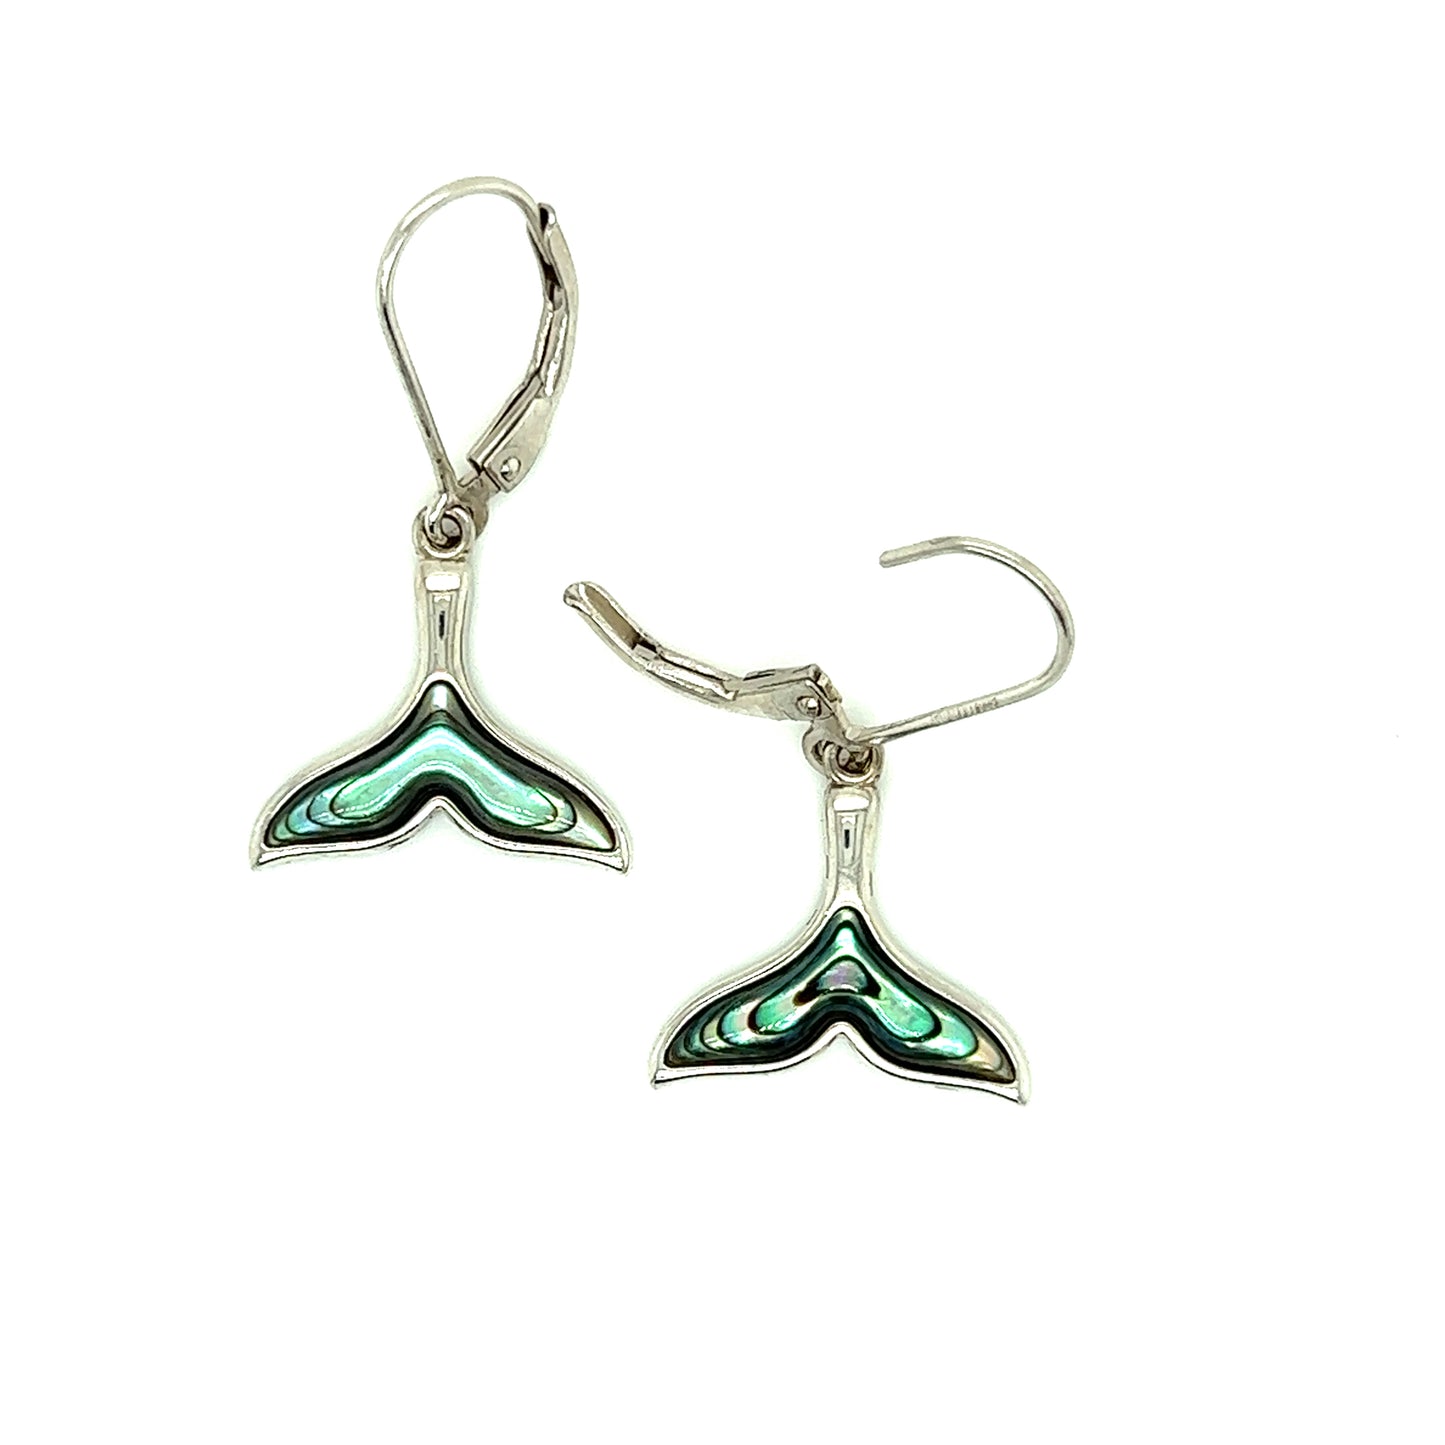 Whale Tail Dangle Earrings with Abalone Shell Details in Sterling Silver Open Lever Back